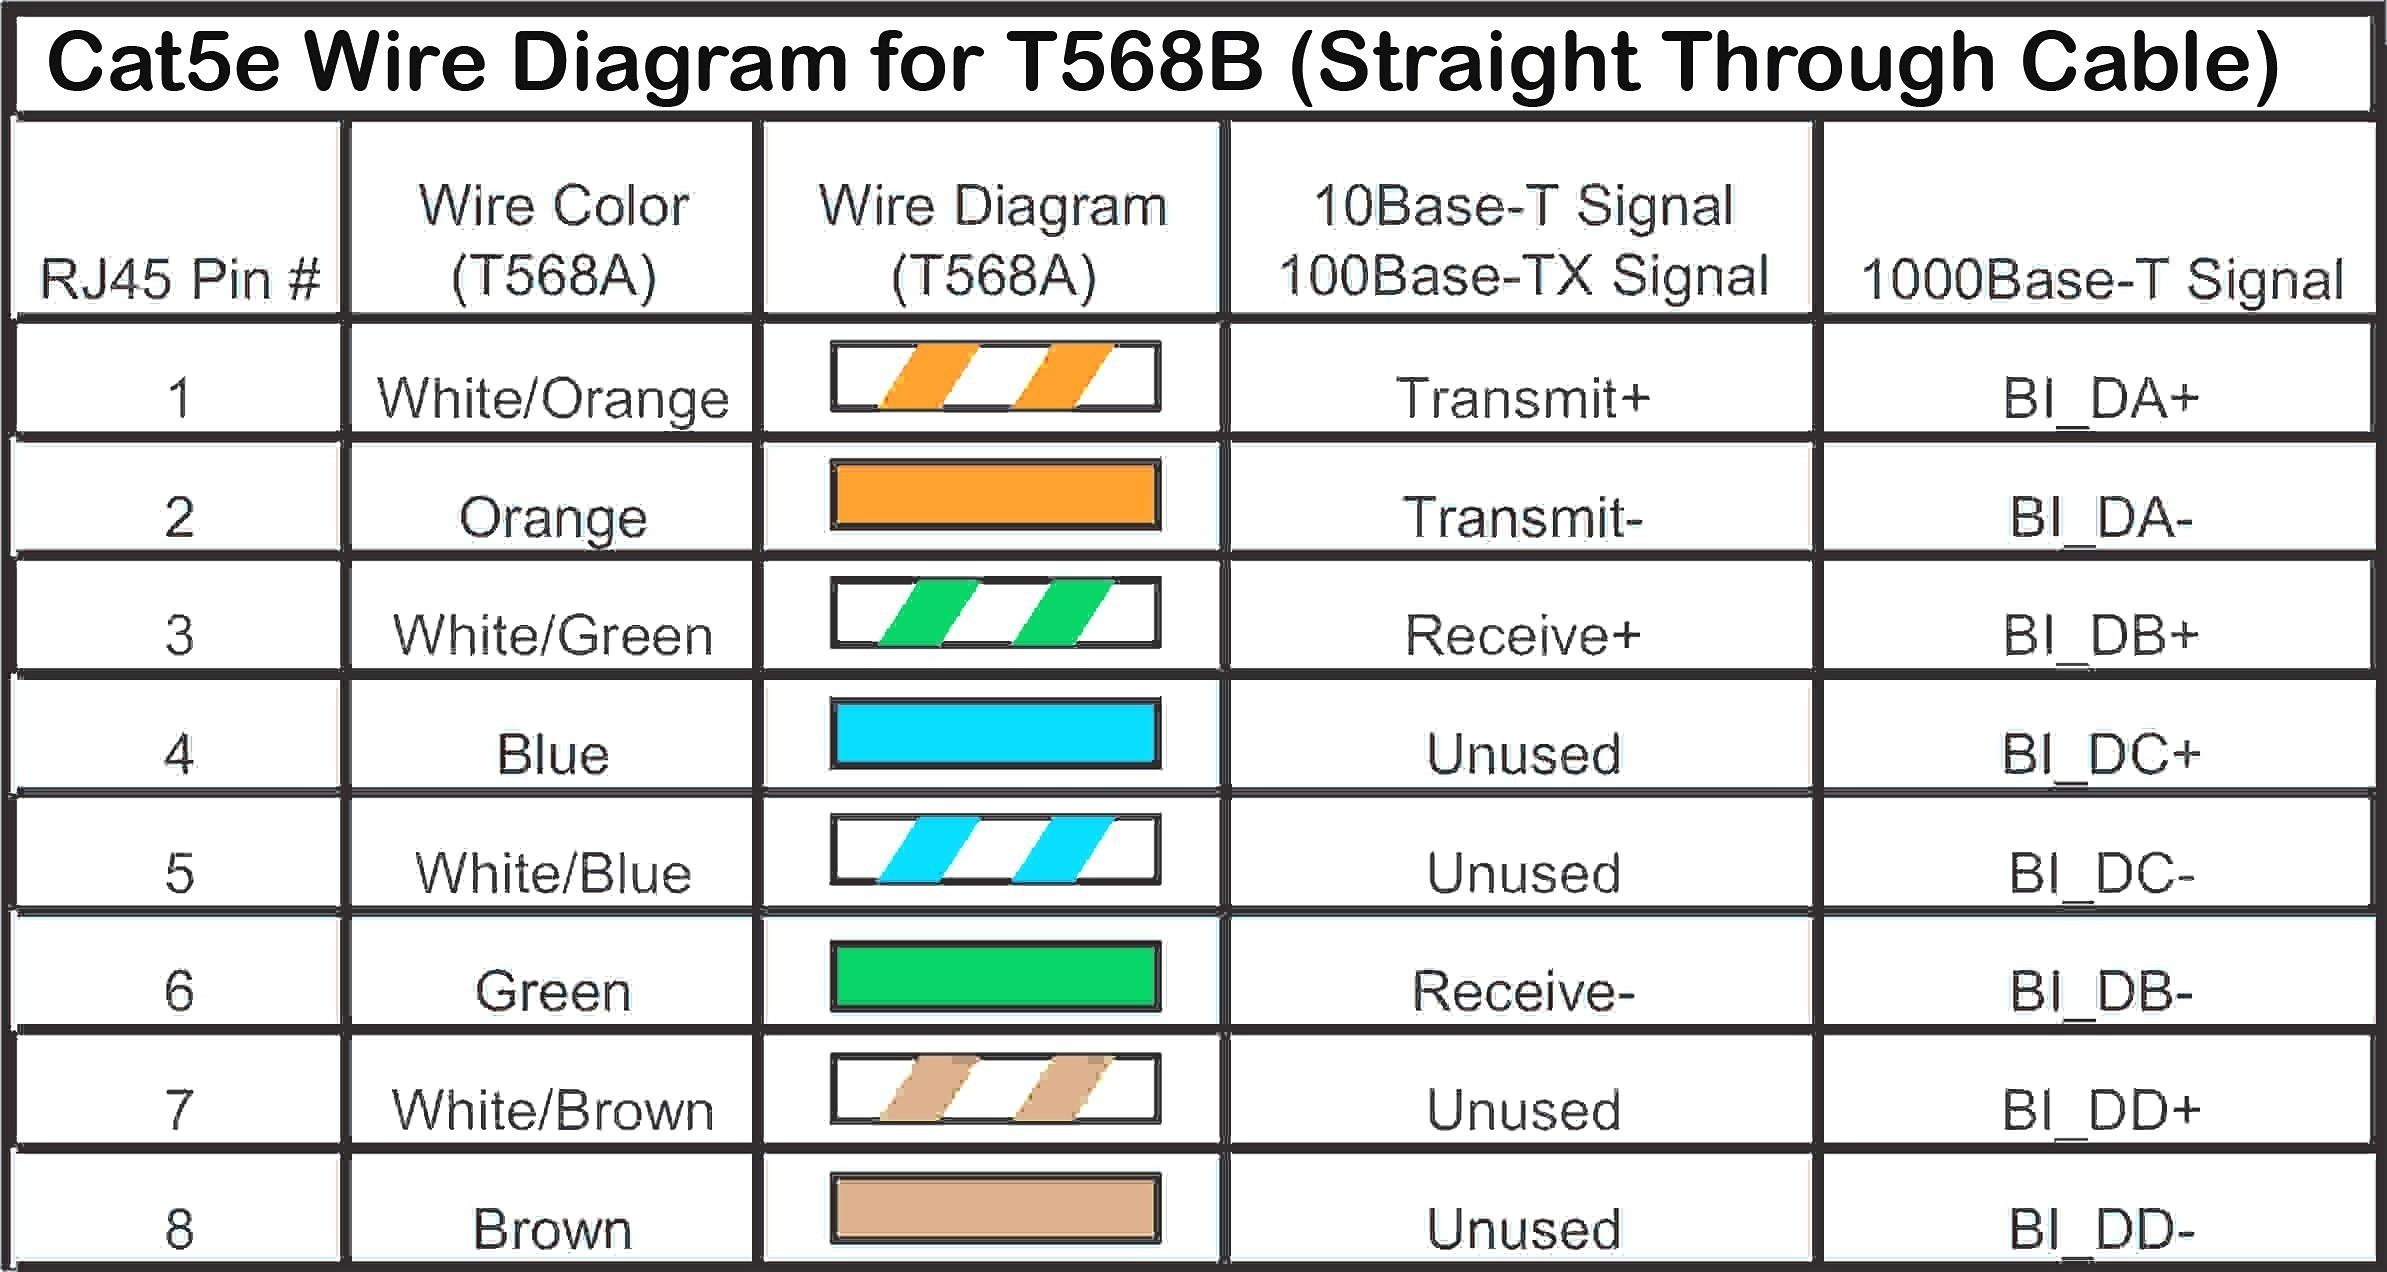 Wiring Diagram for Cat5 Crossover Cable New Cat5e Wire Diagram New Ethernet Cable Wiring Diagram New